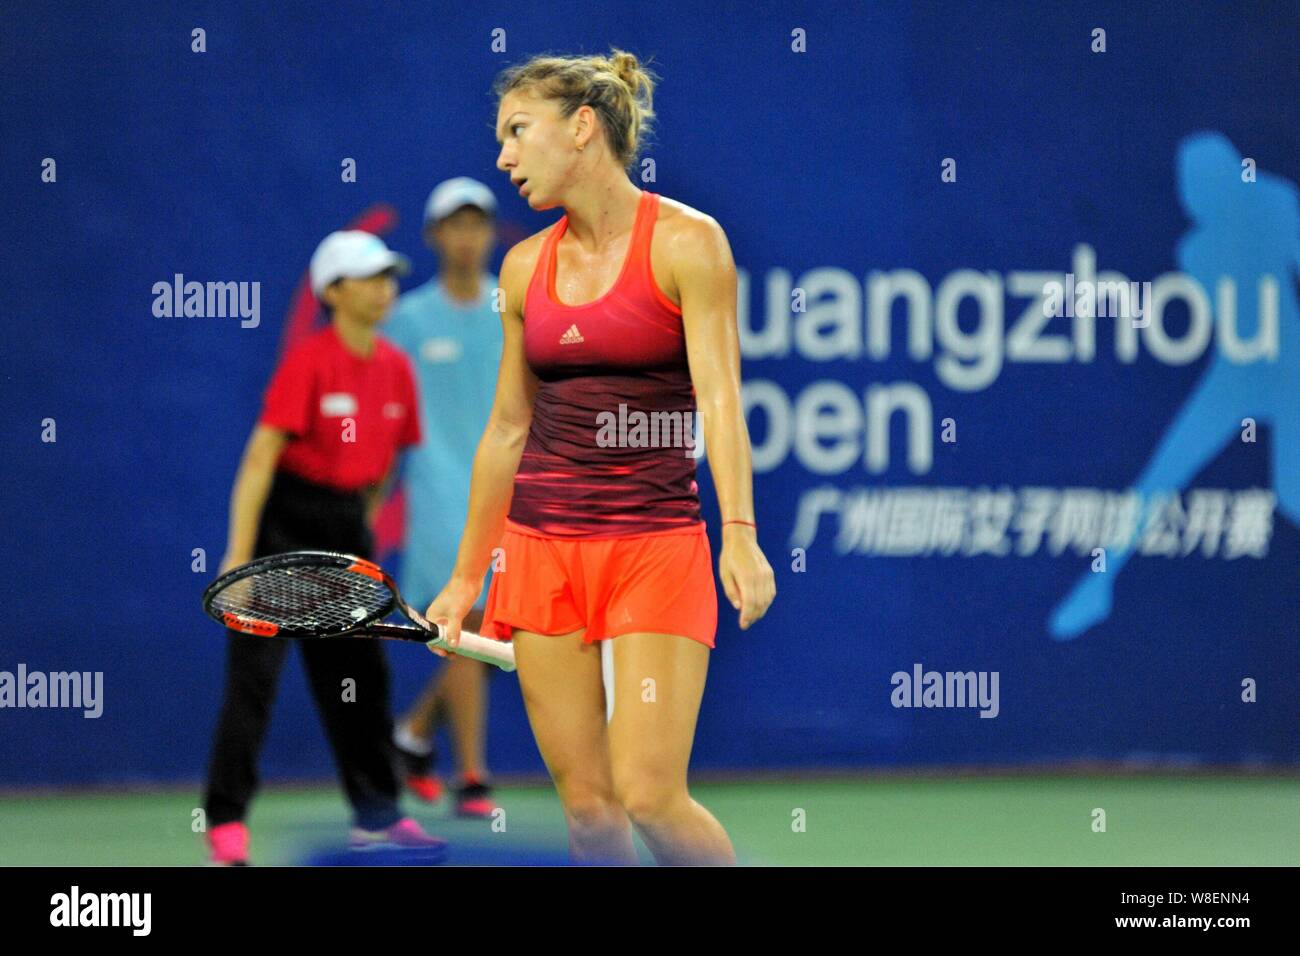 Simona Halep of Romania reacts after losing scores to Denisa Allertova of Czech Republic in their quarterfinal match of the womens singles during the Stock Photo